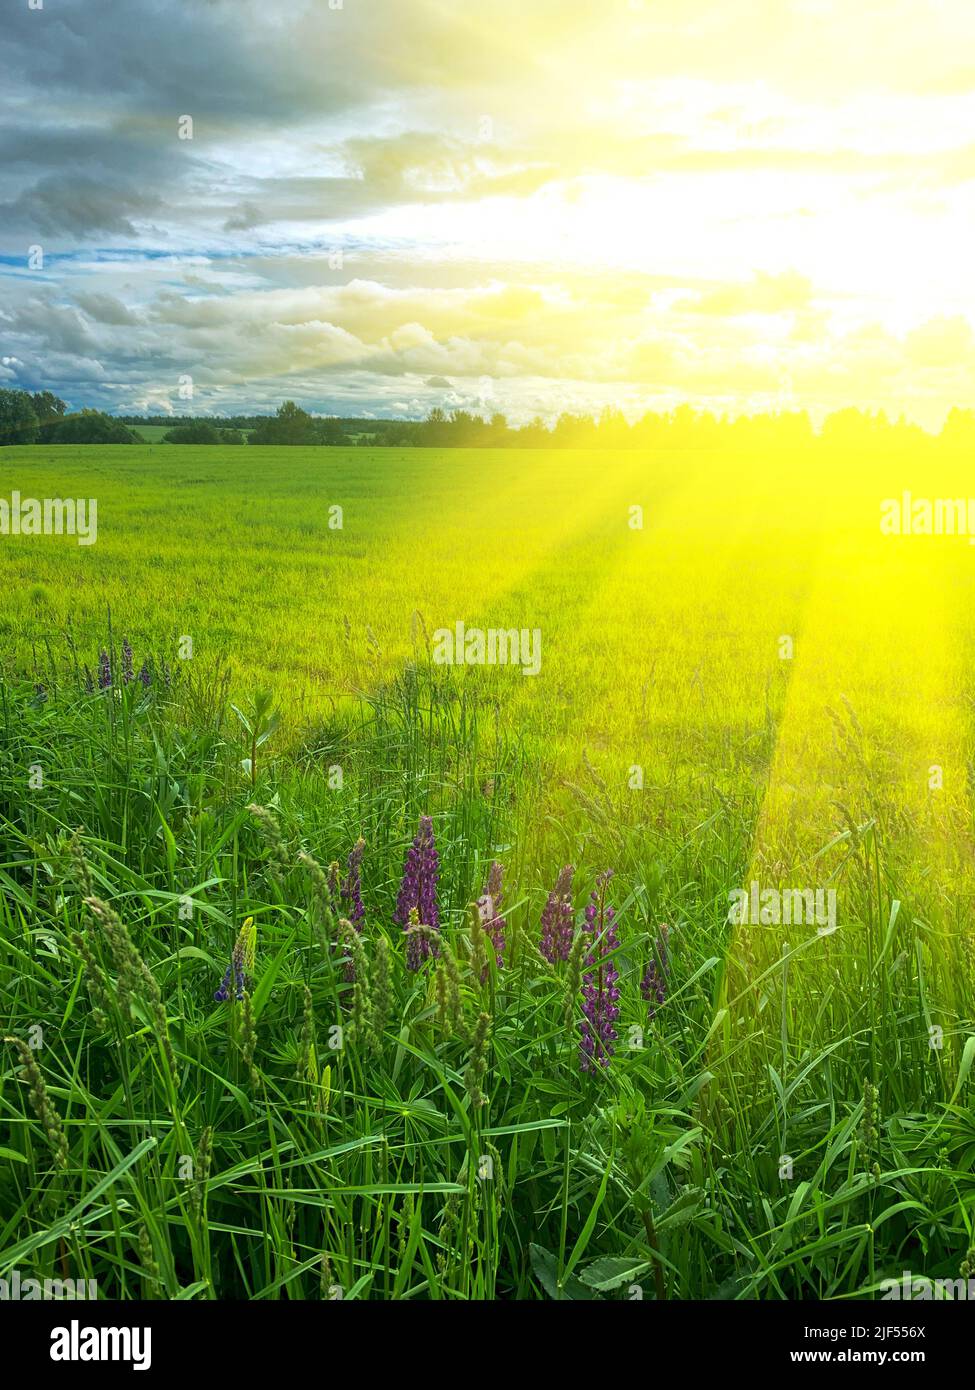 Purple blue lupine flowers along field edge with sun beams on summer blurred landscape background Stock Photo